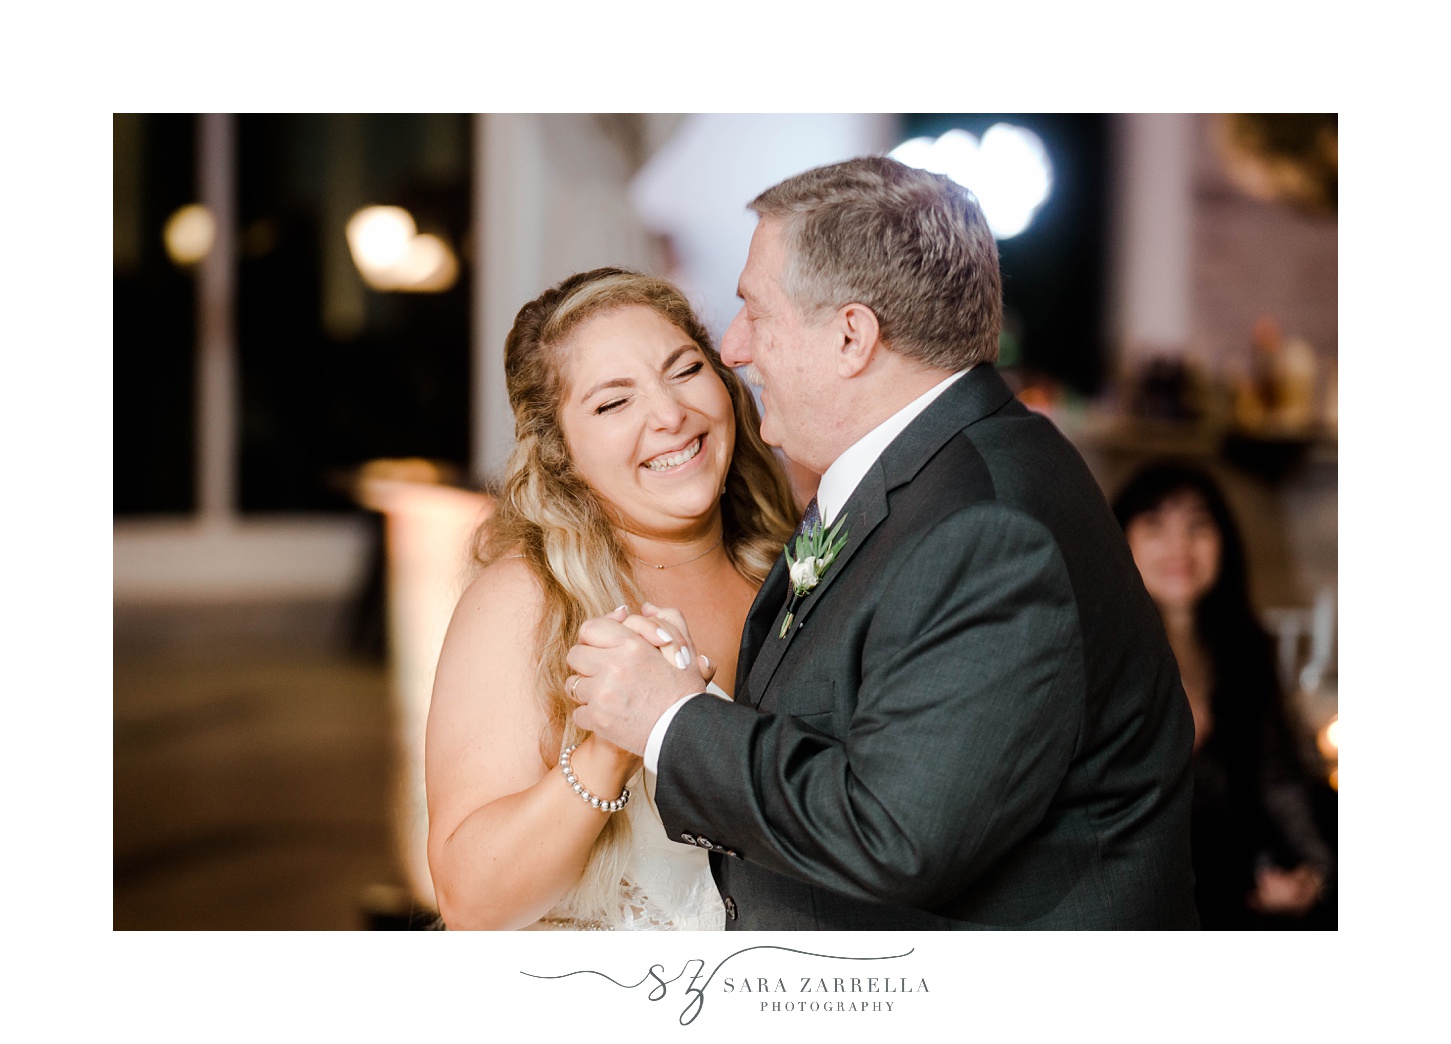 dad laughs with bride during dance at Newport RI wedding reception